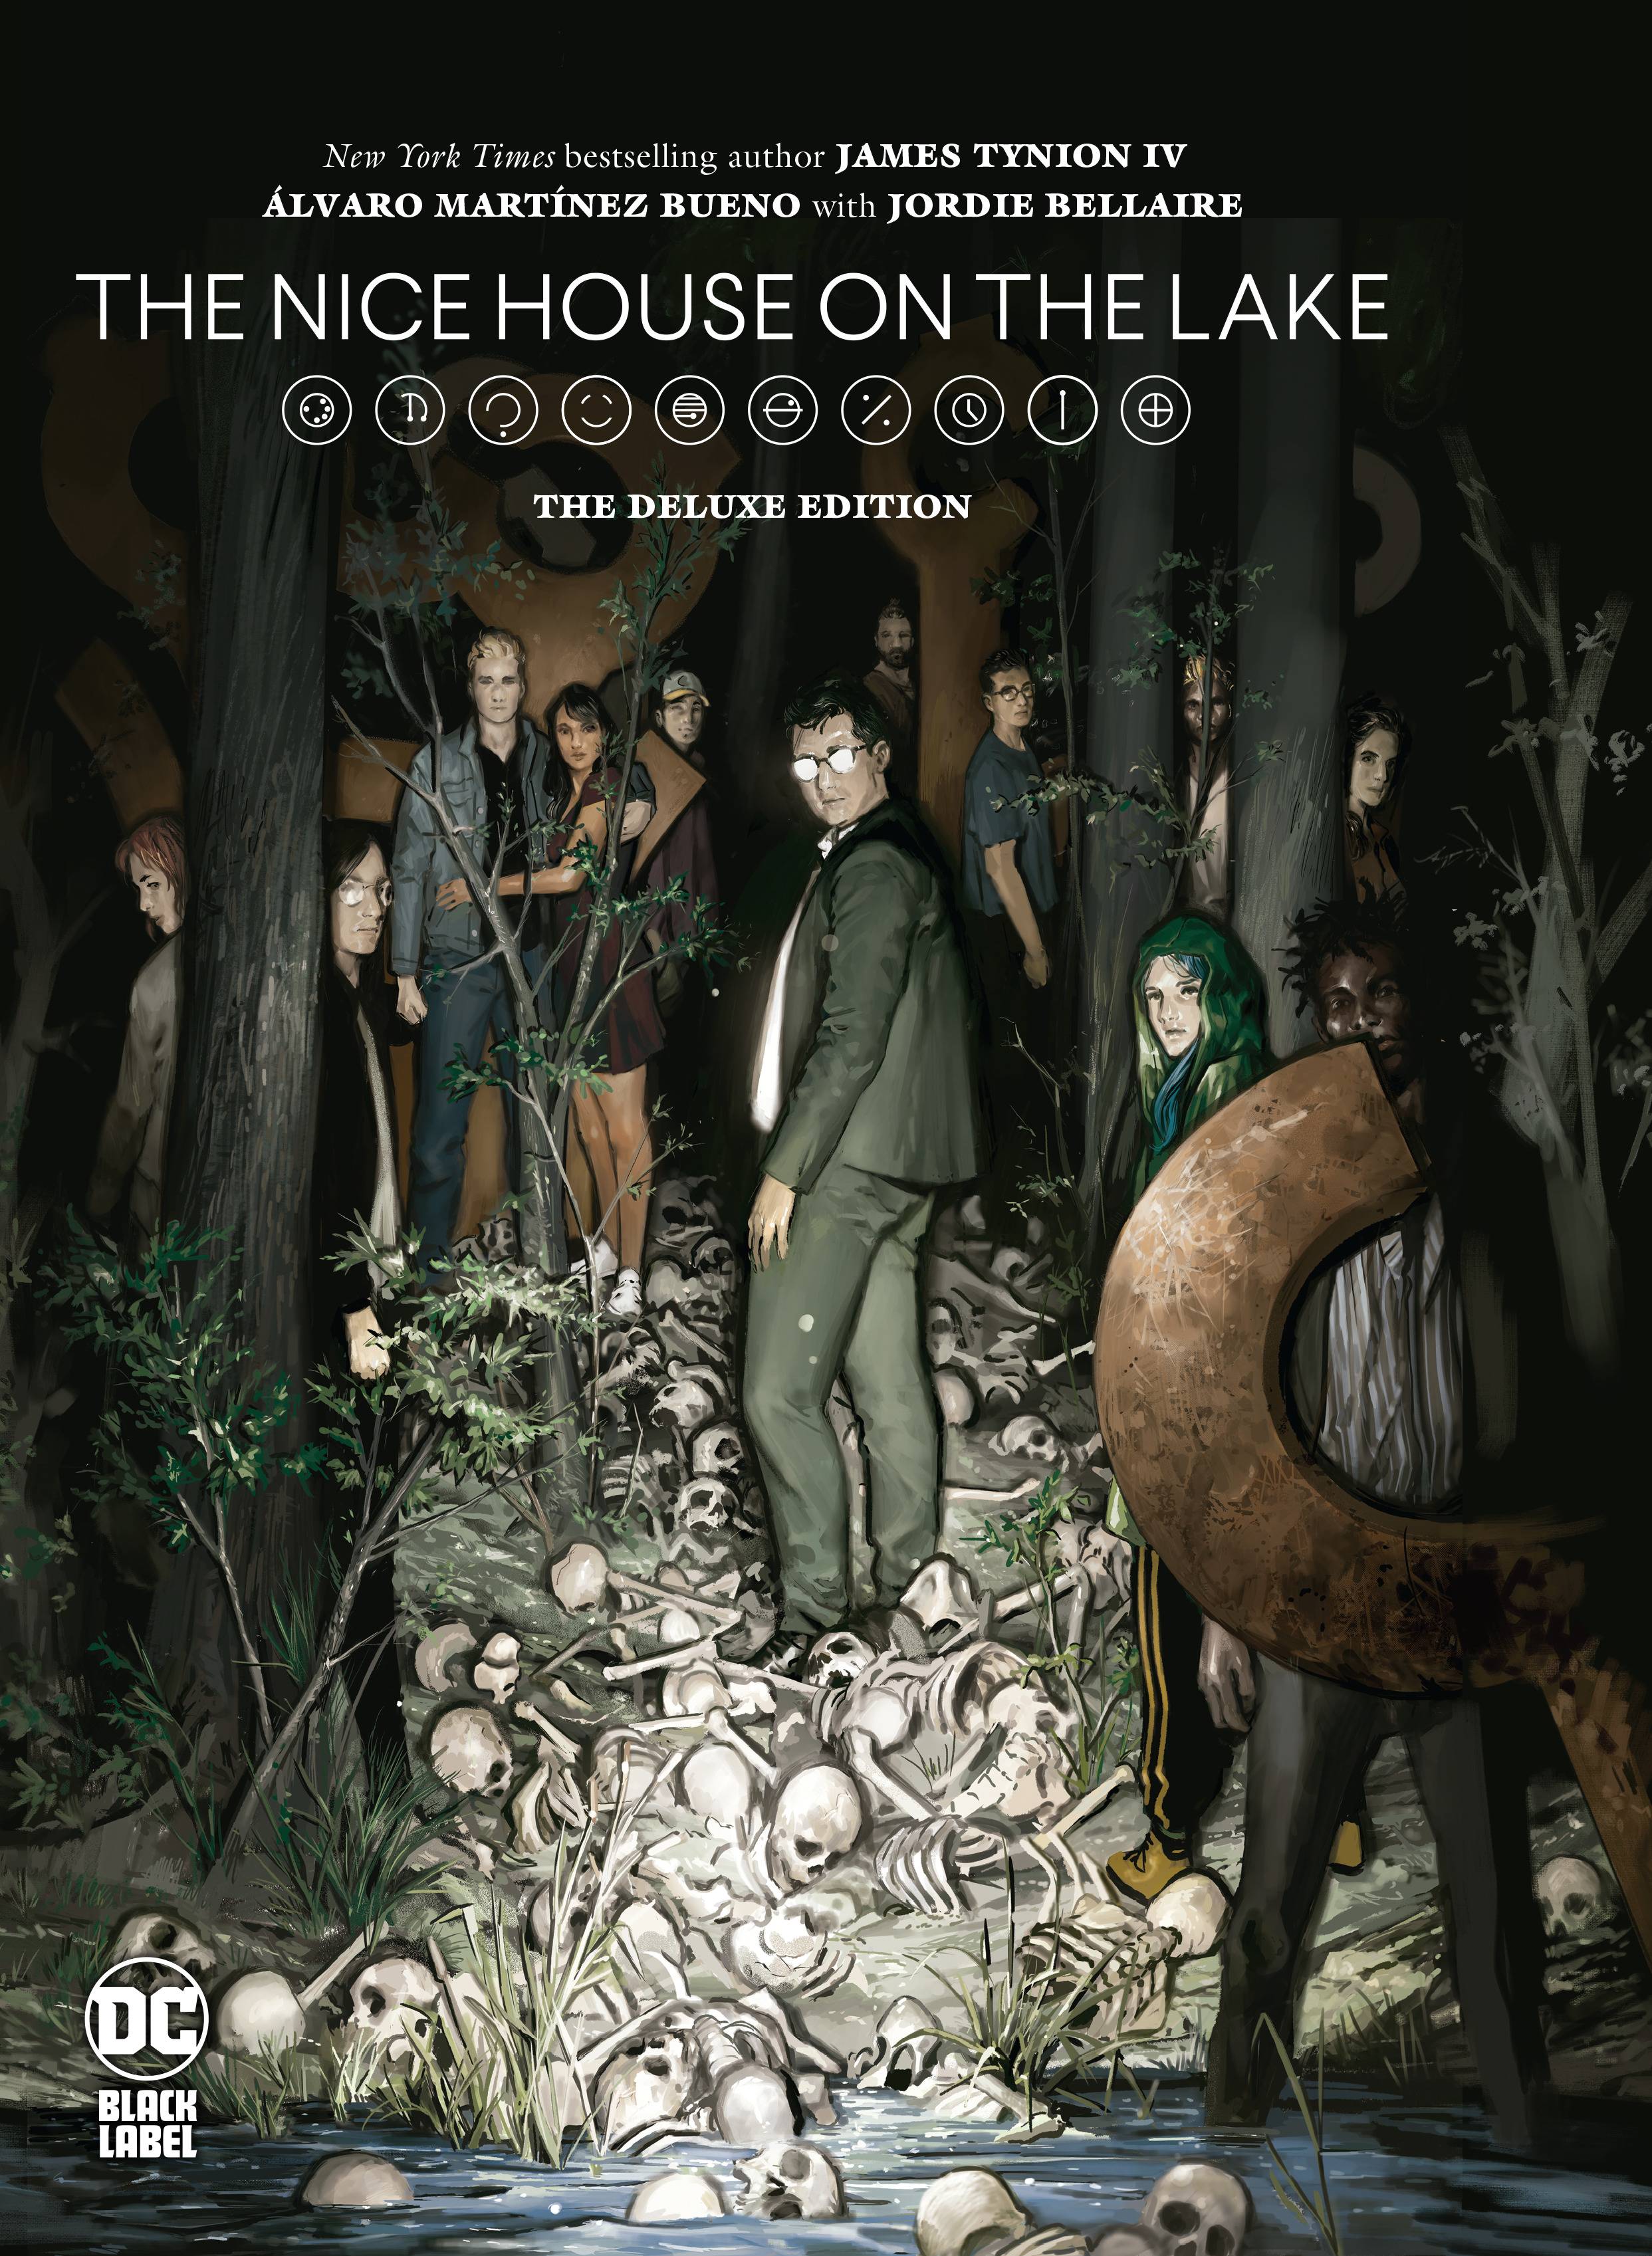 NICE HOUSE ON THE LAKE THE DELUXE EDITION HC (MR)